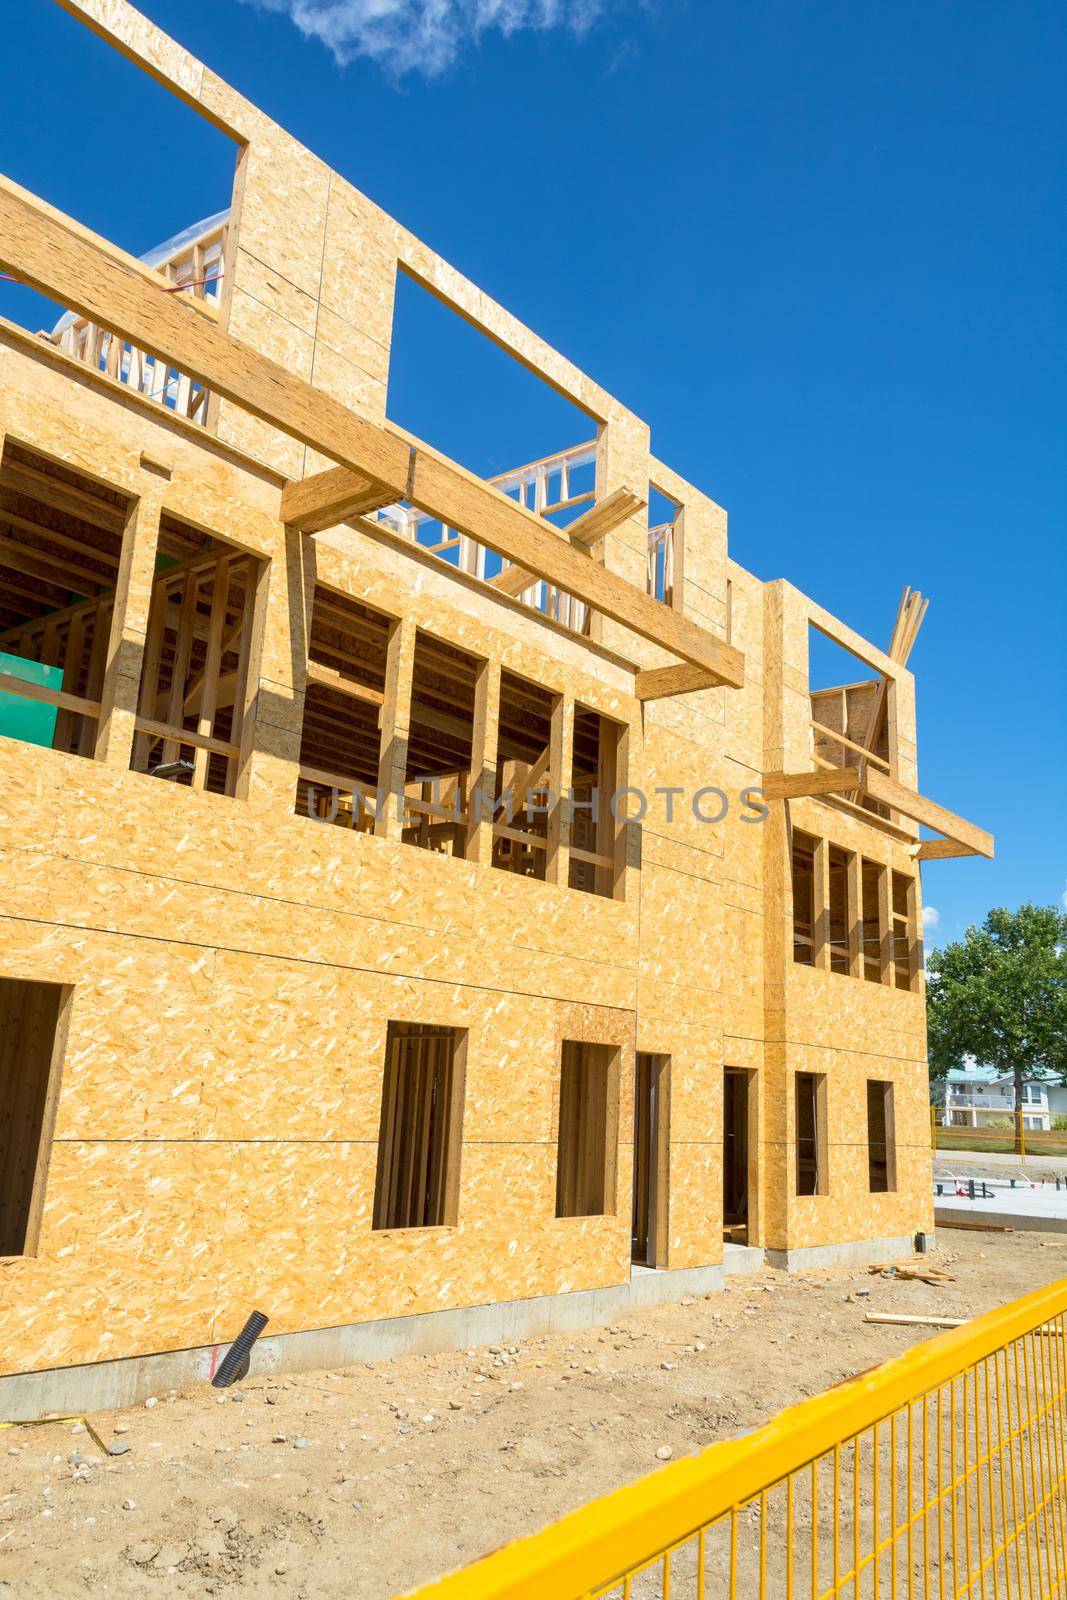 New residential building under construction with metal fence in front. Low rise wooden framework of the building on concrete base